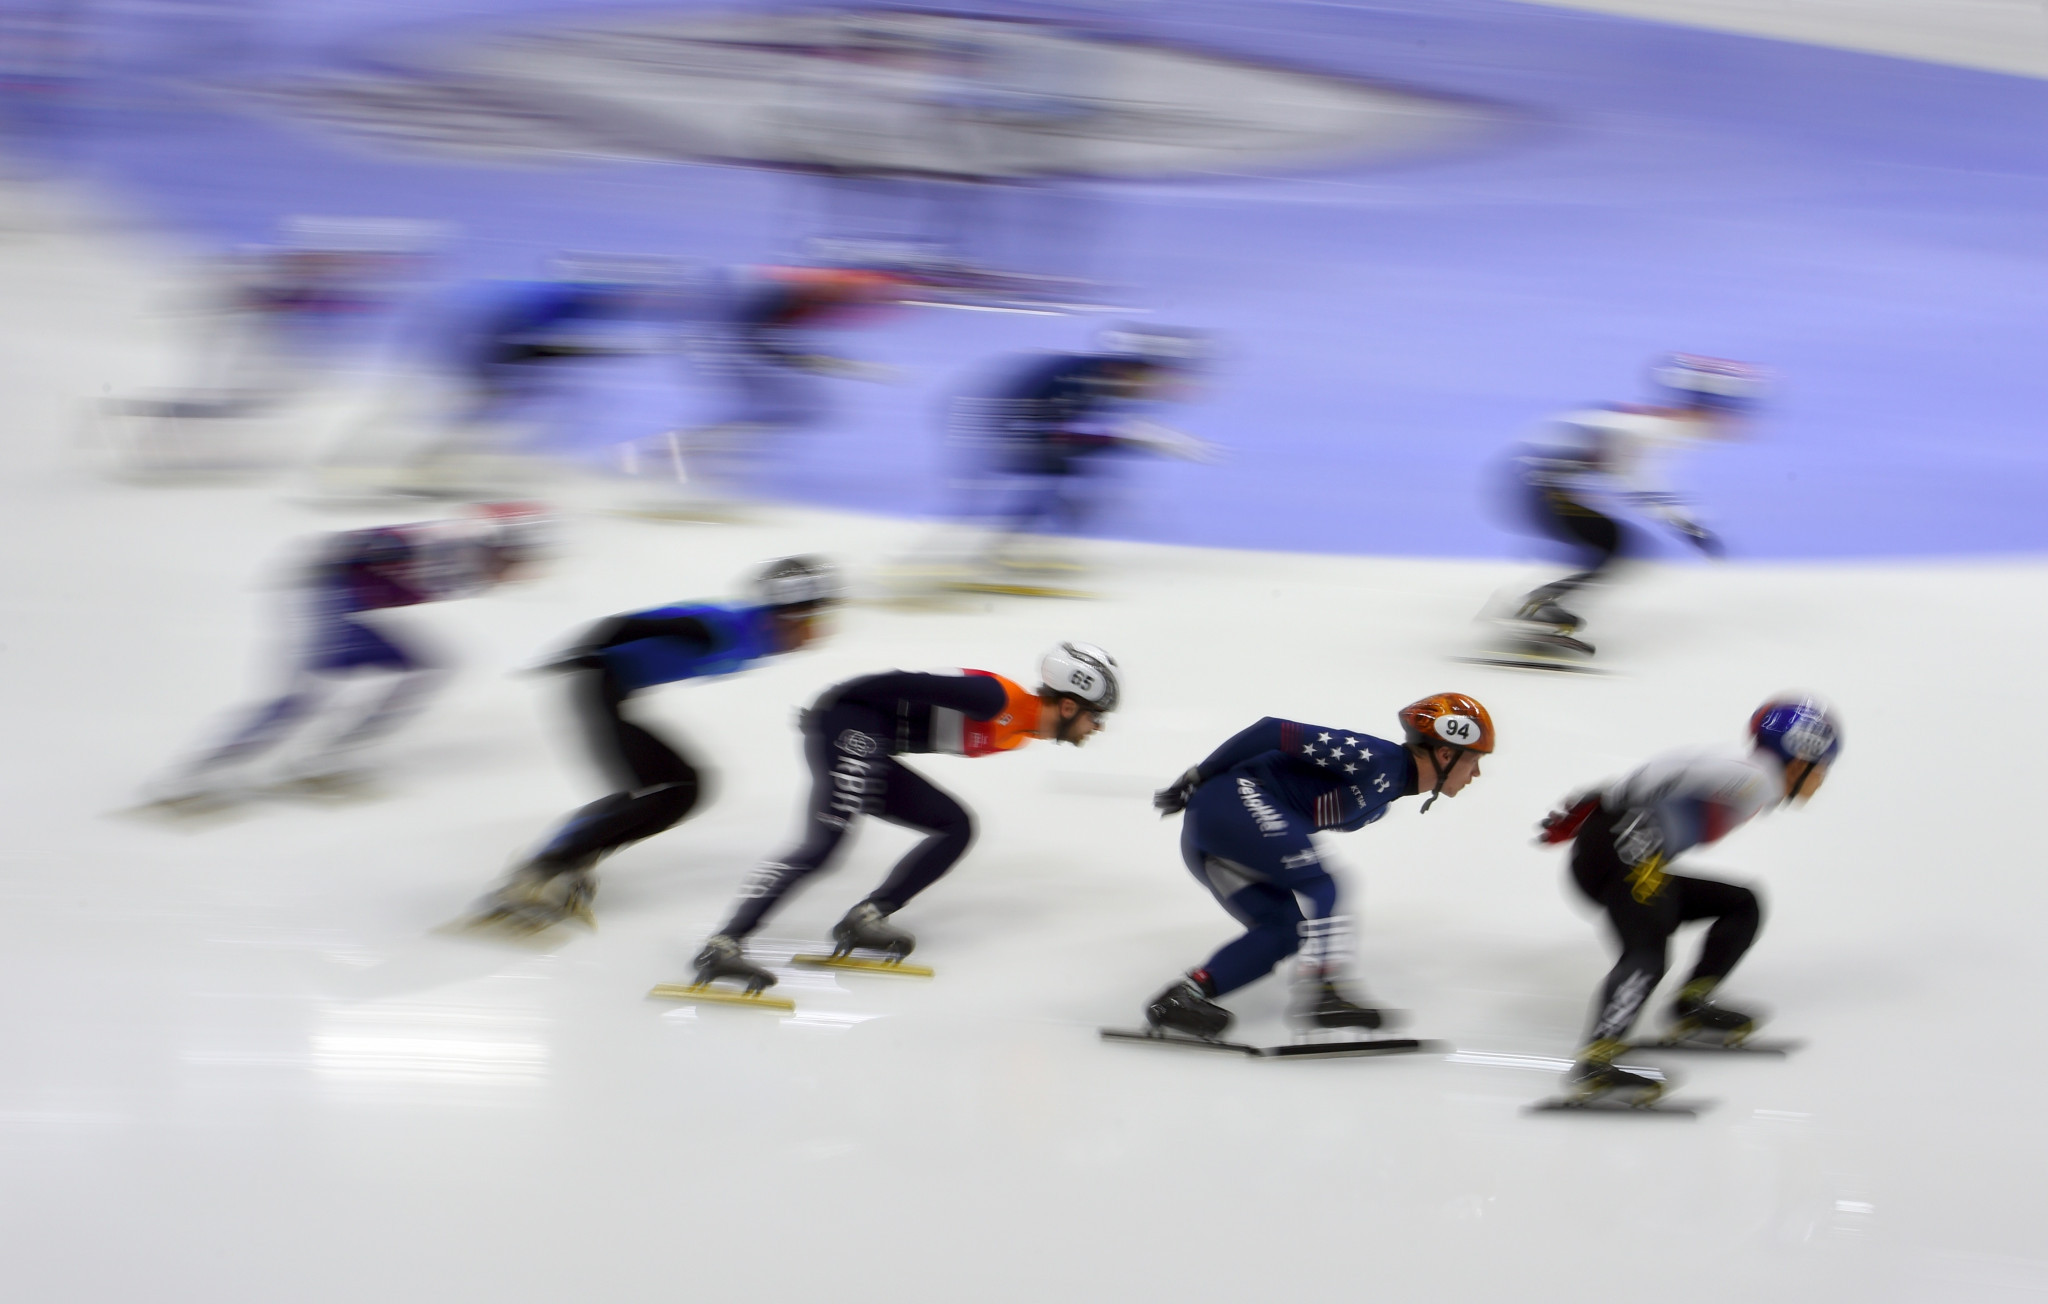 The new season for short track speed skating will start this weekend with the ISU World Cup Short Track event in Calgary ©Getty Image